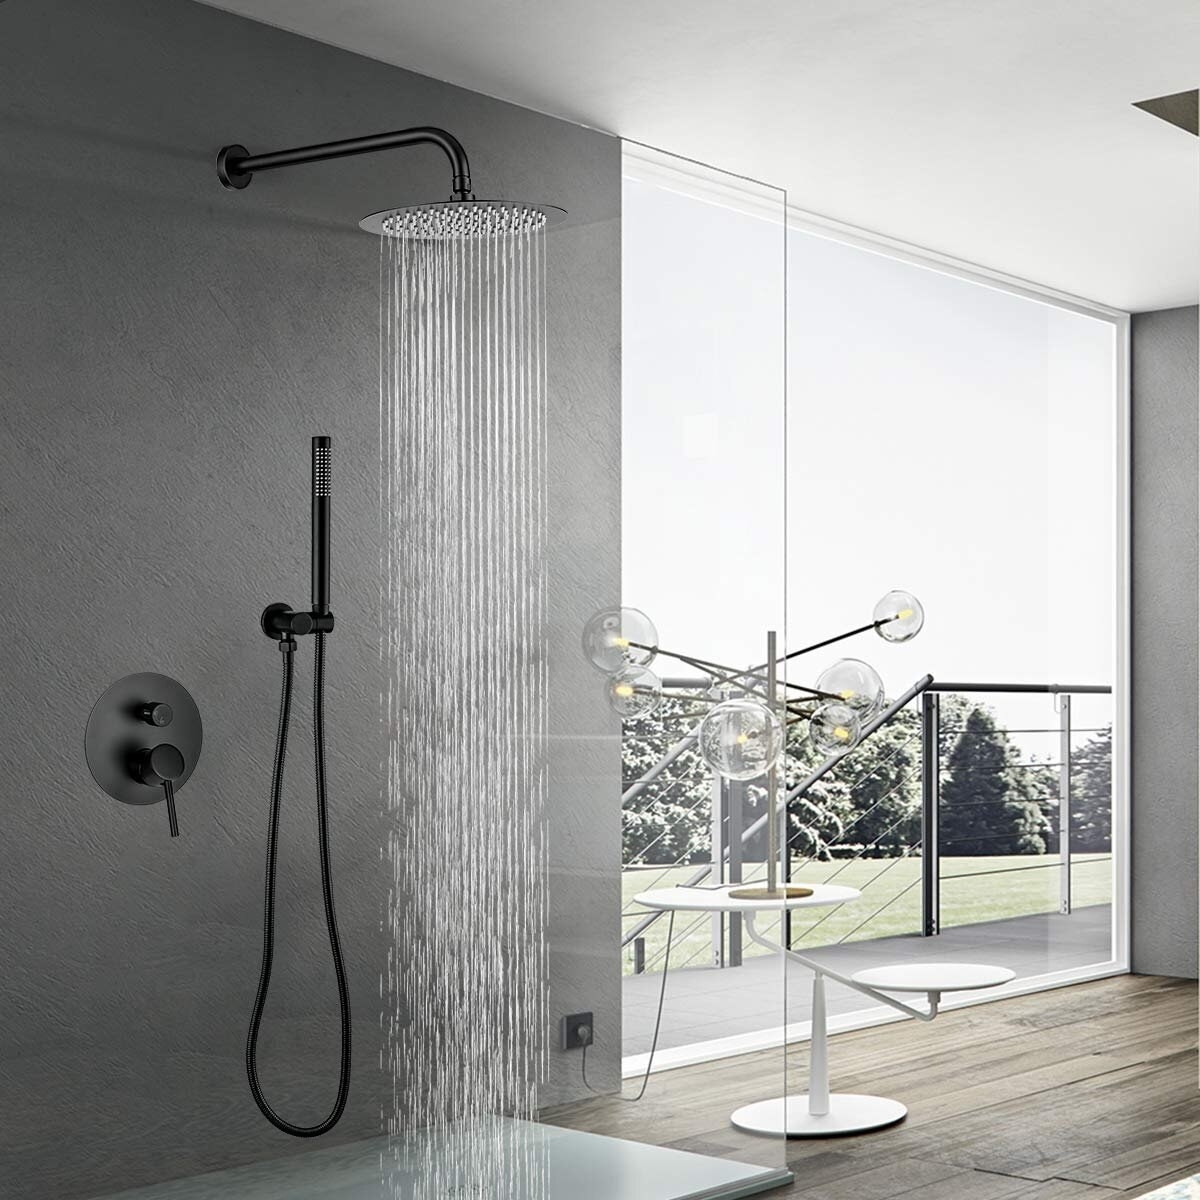 the black shower head with water pouring out